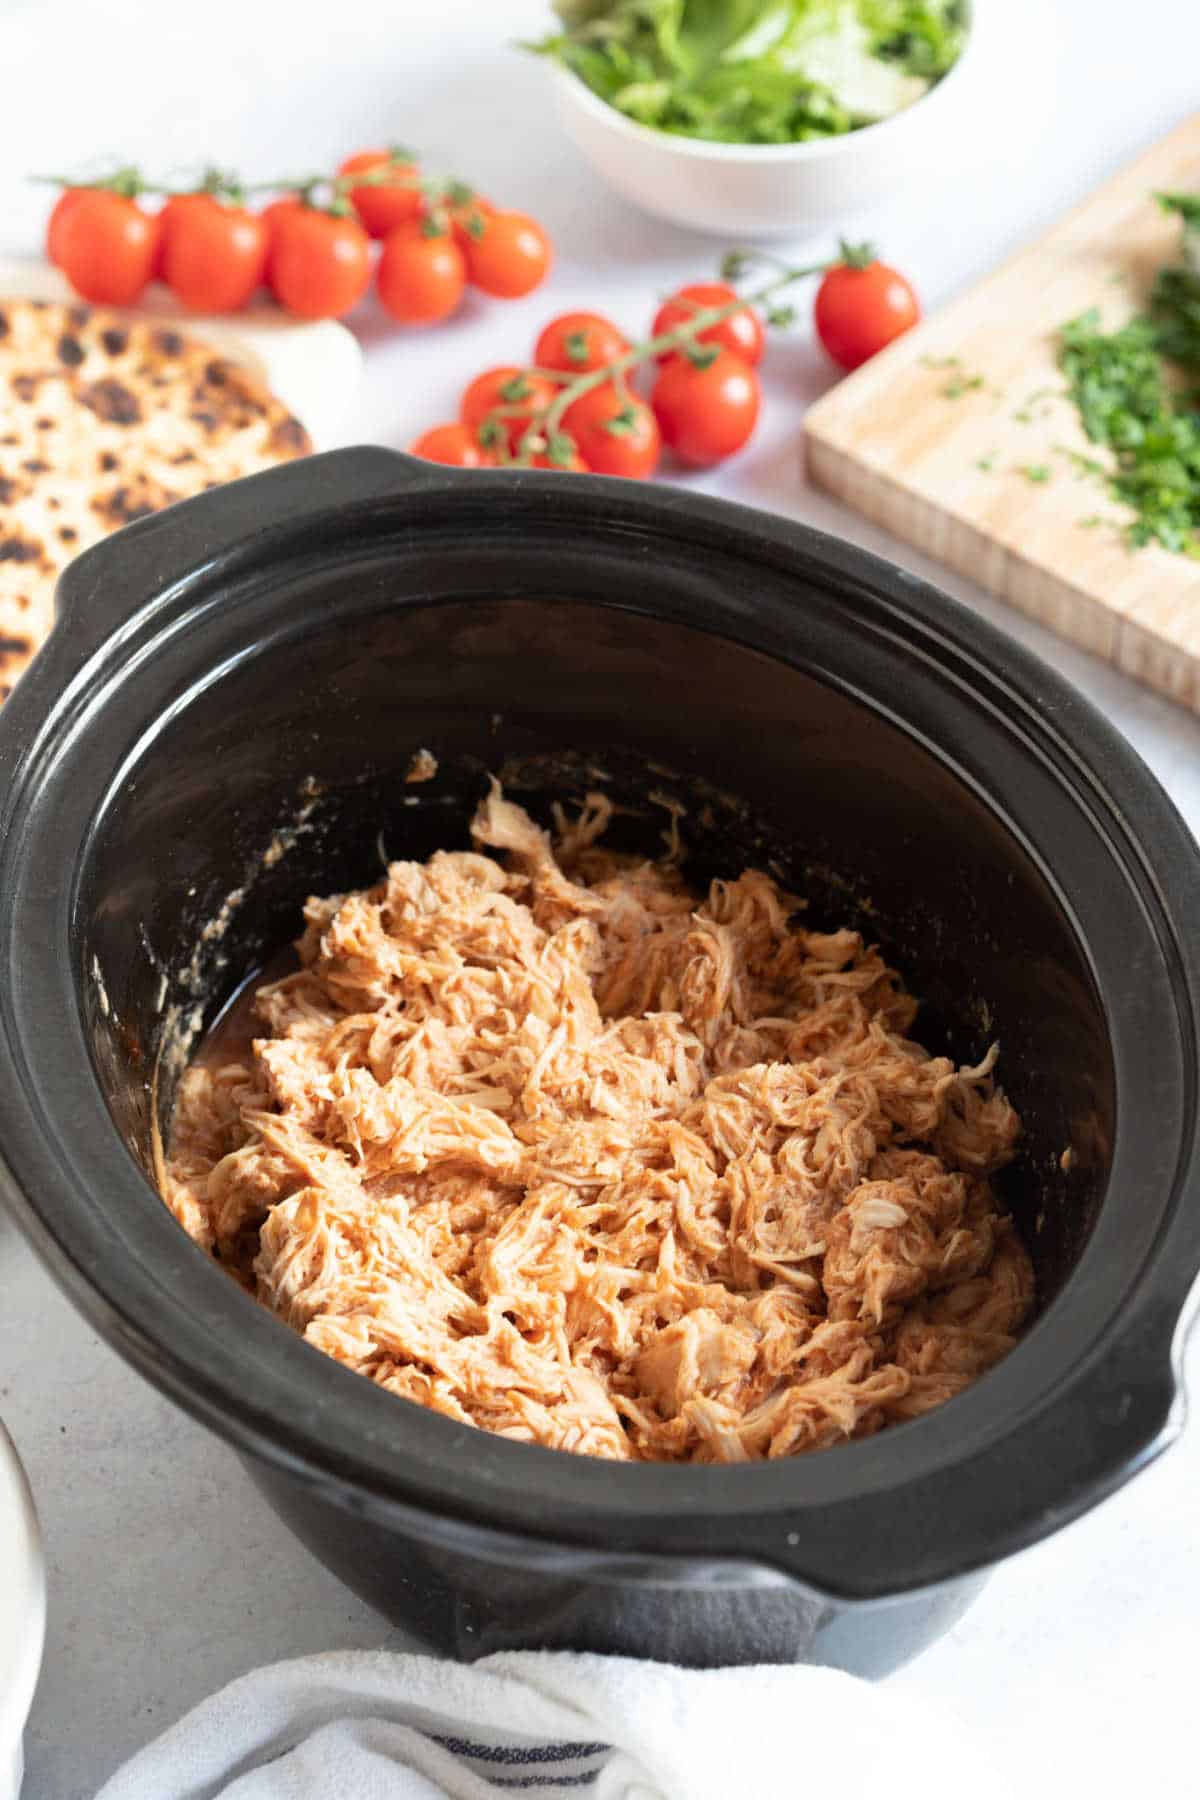 Slow cooker BBQ pulled chicken in a black slow cooker basin.